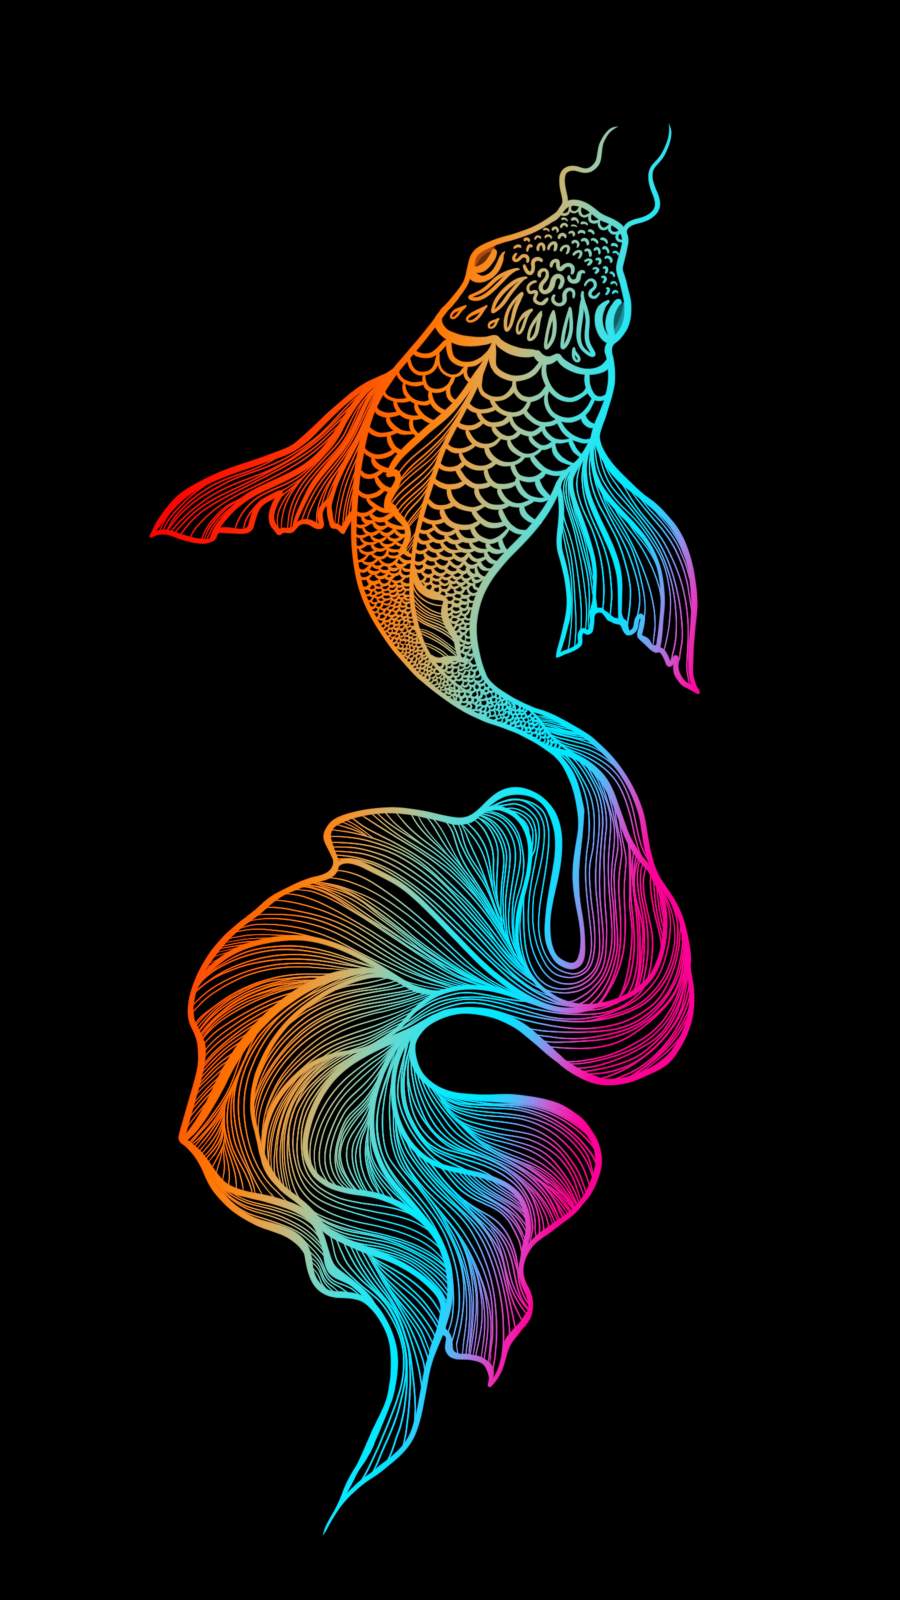 Download wallpaper fish, gradient, black background for mobile devices. - Koi fish, fish